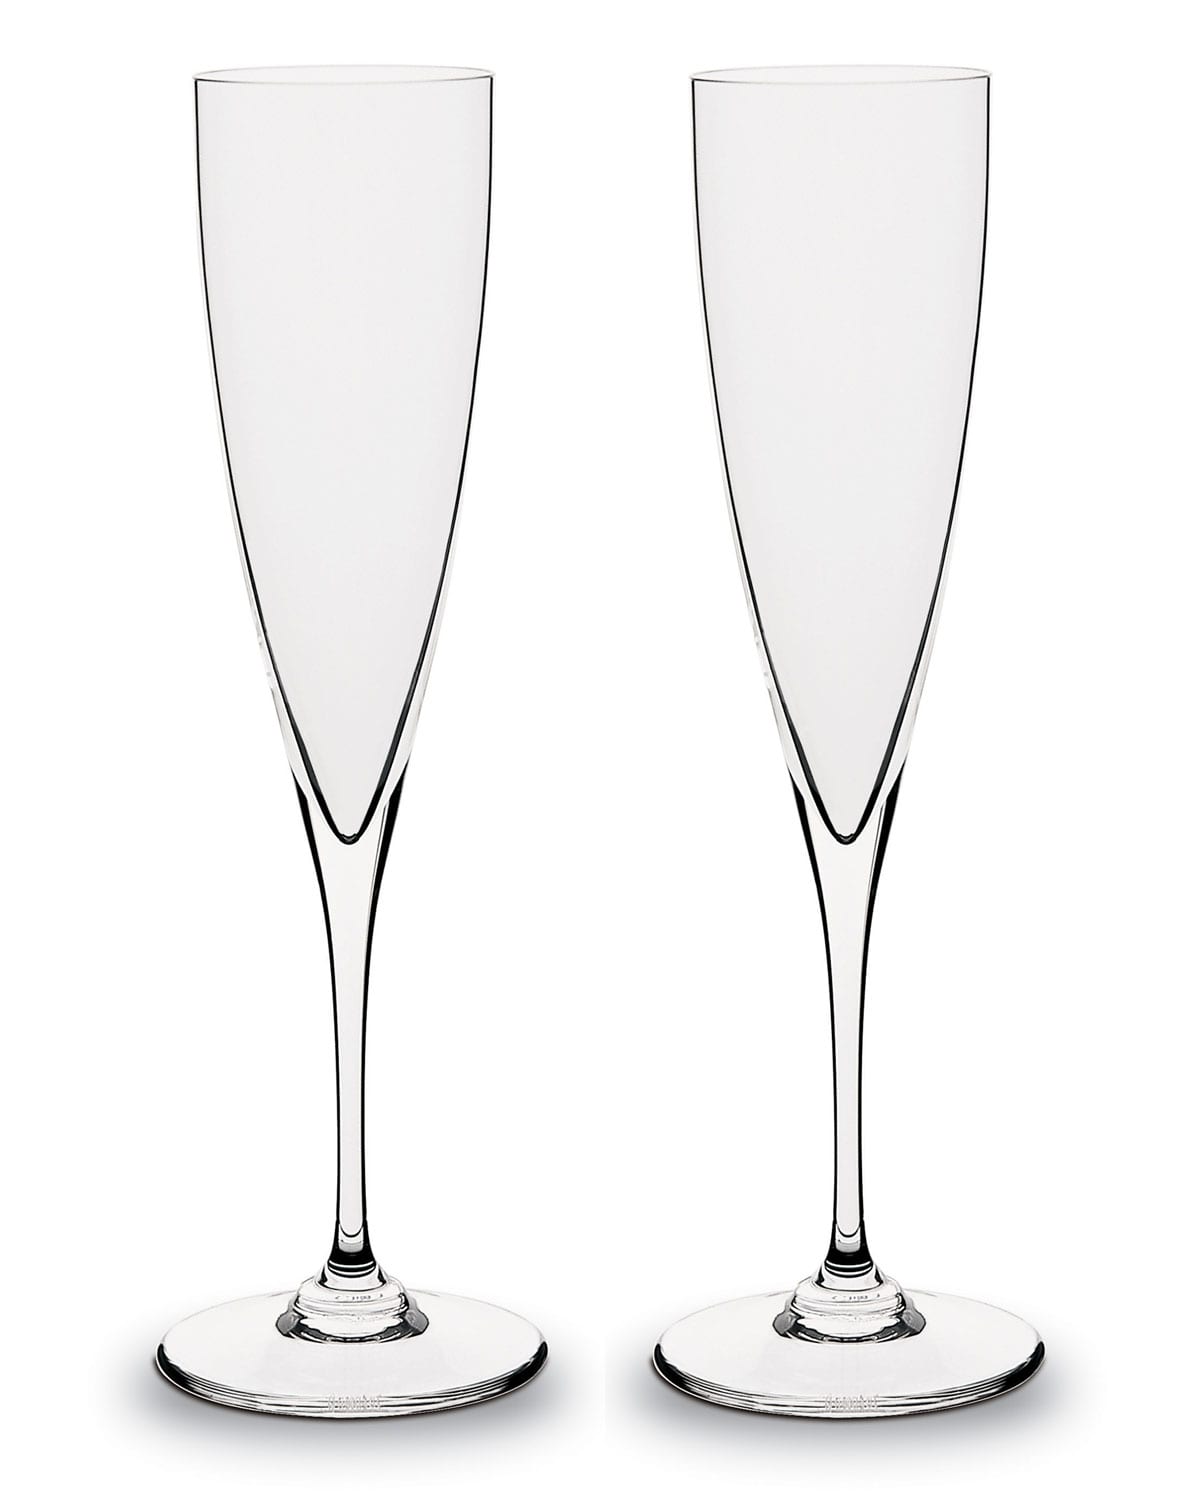 Top Wedding Gifts 2016: Dom Perignon Champagne Flutes 2017